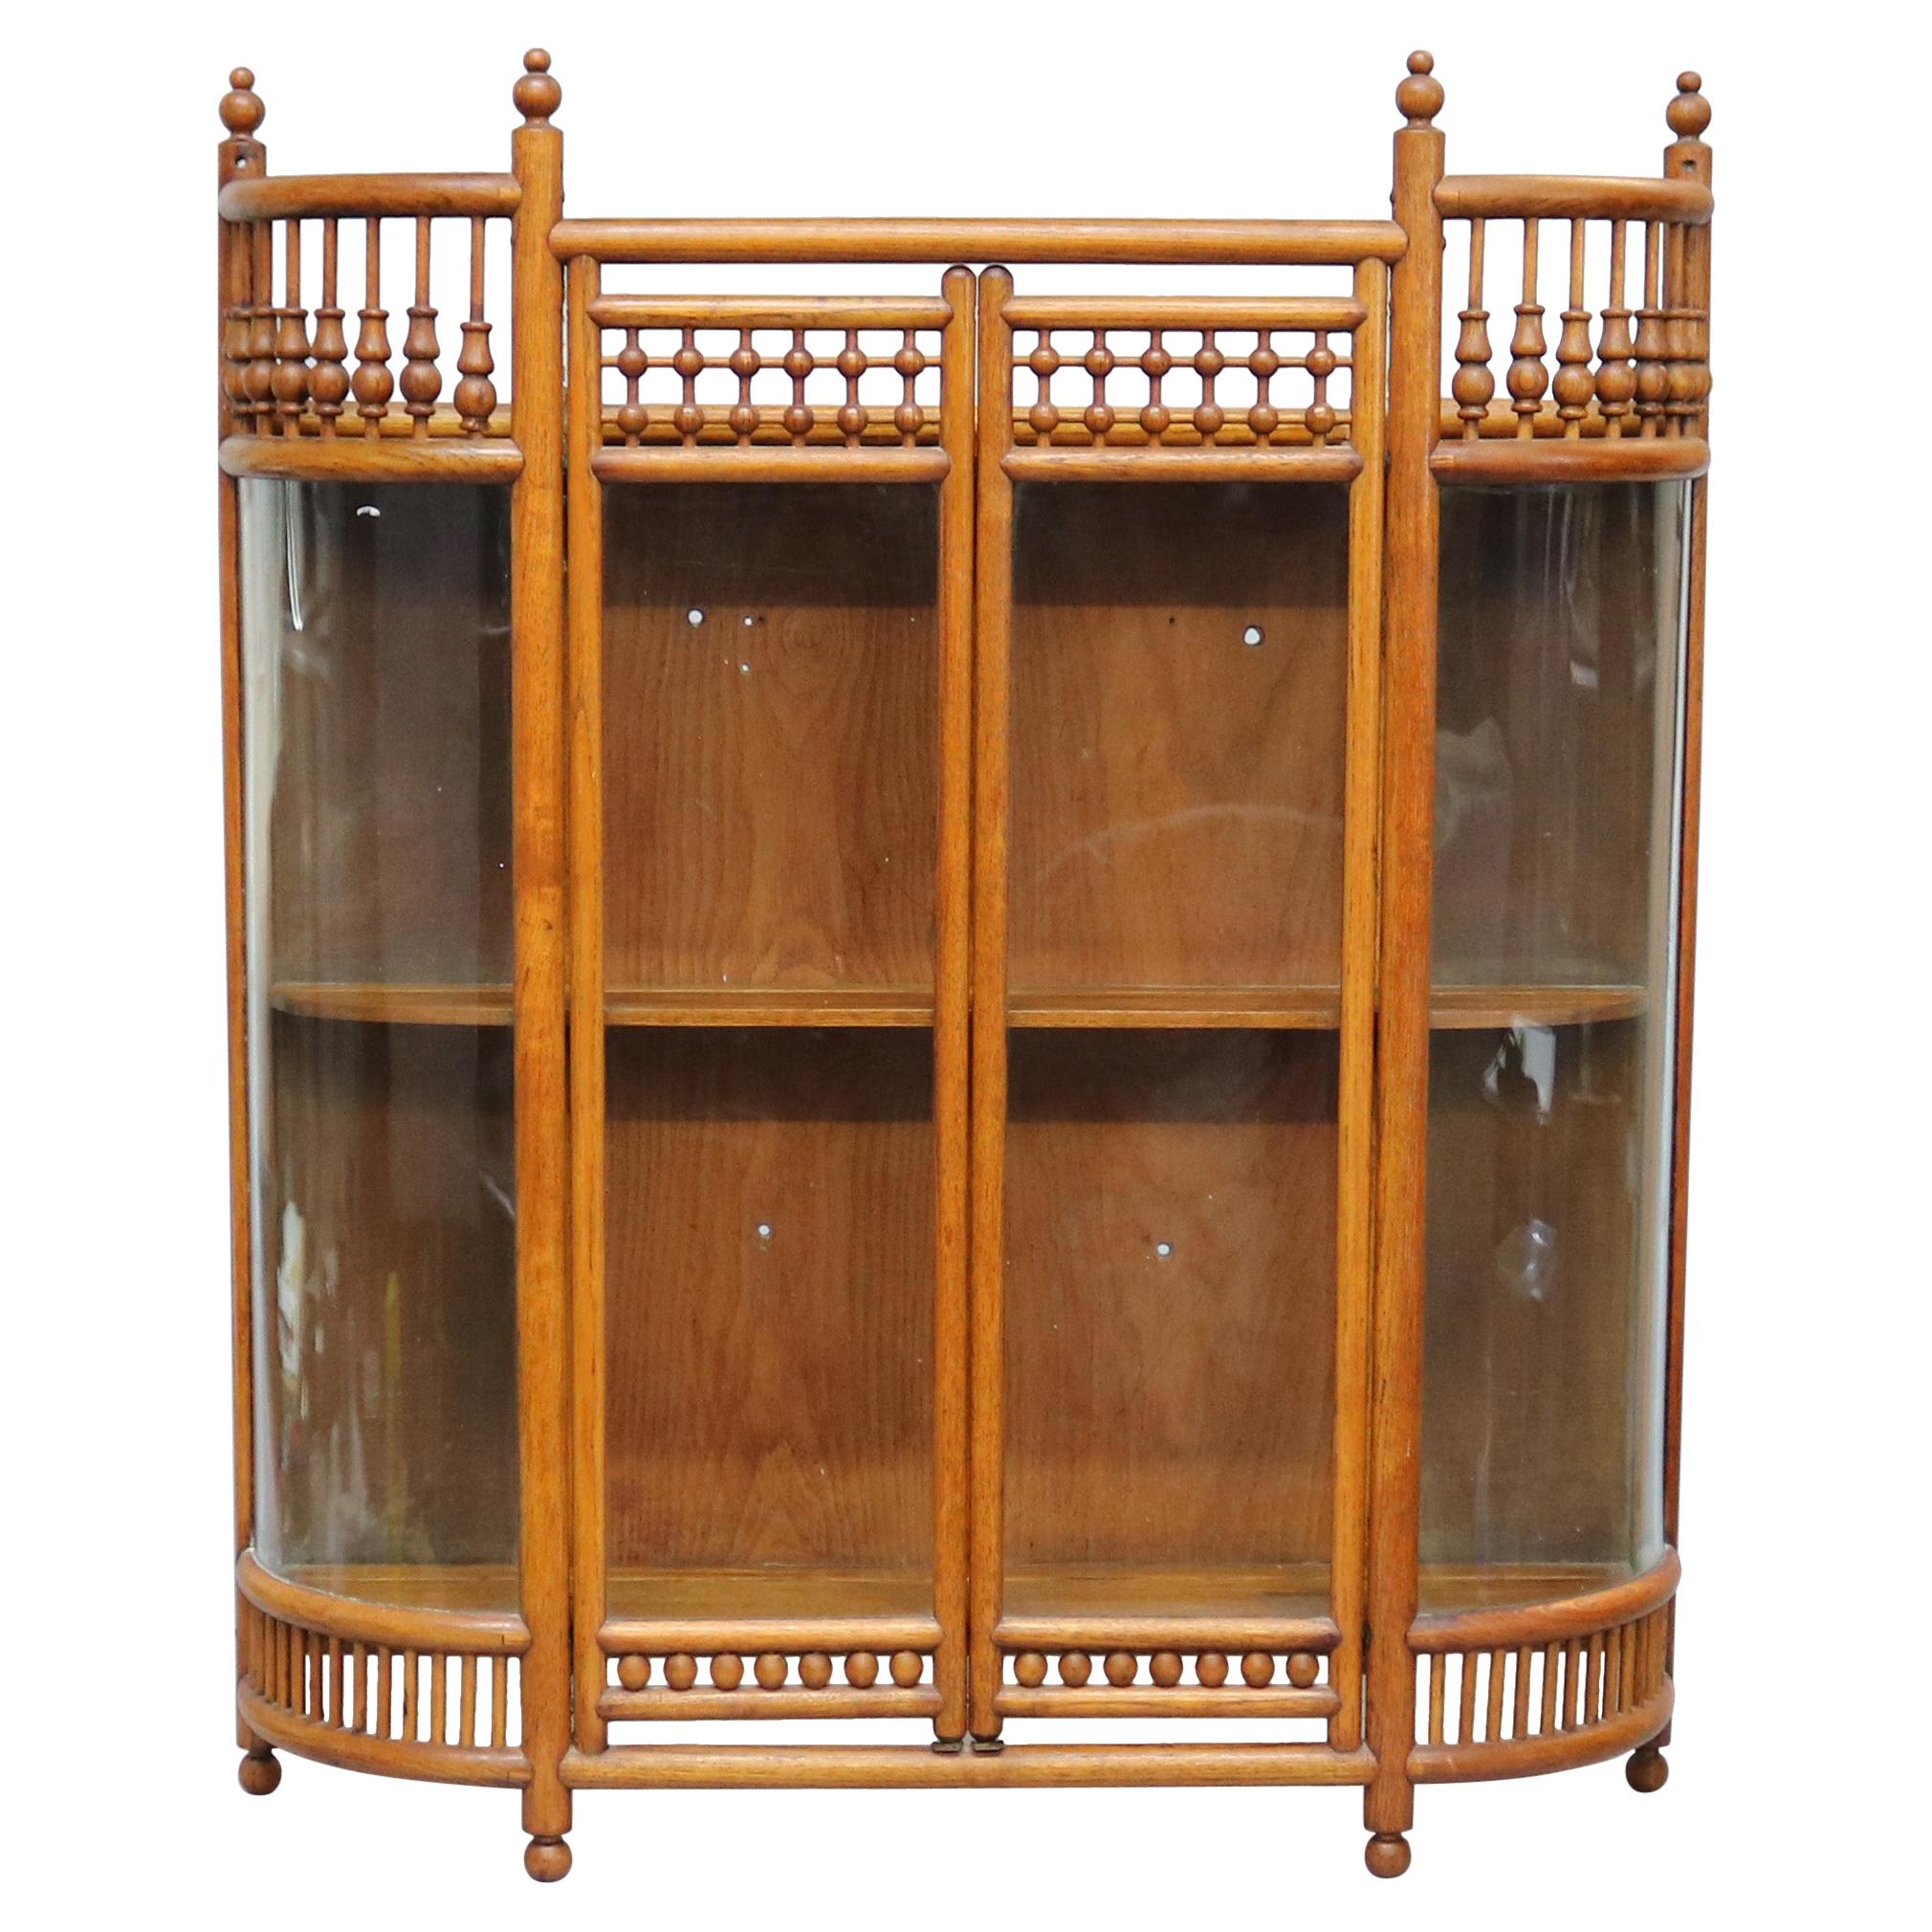 Antique Victorian Stick & Ball Oak Hanging Demilune Wall Display Cabinet, c1900